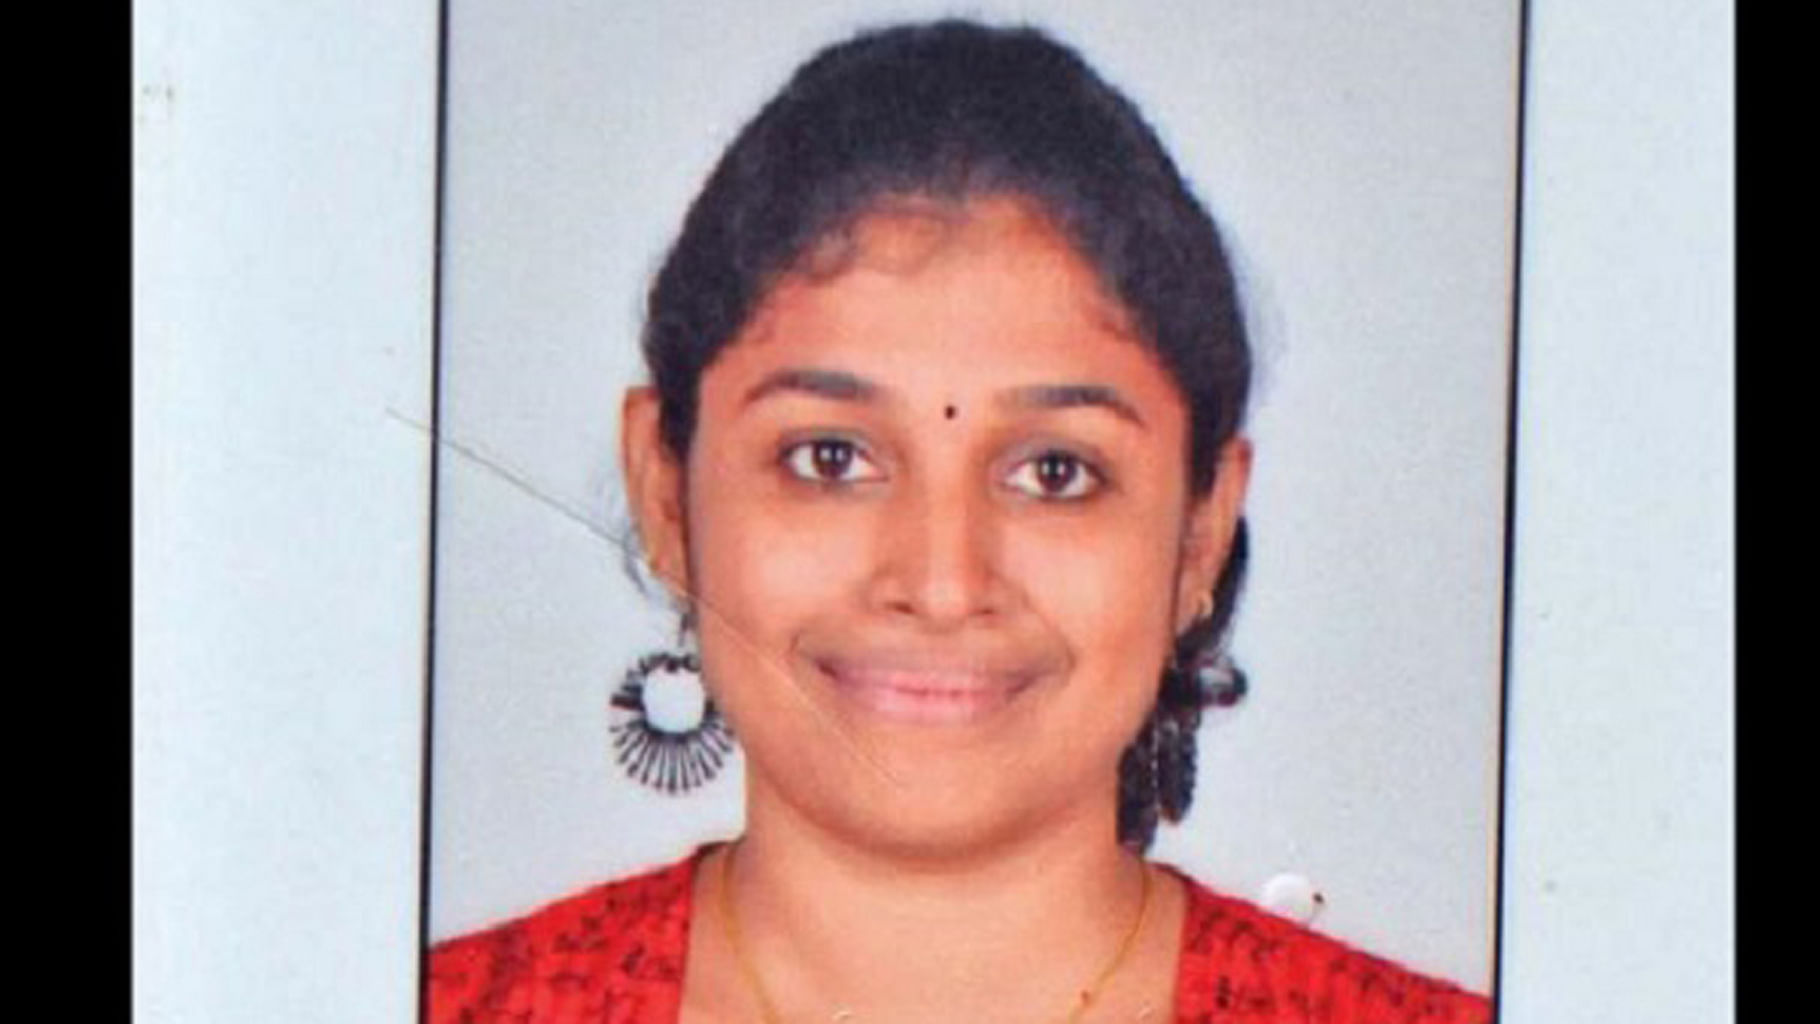 S Swathi, the Infosys employee who was hacked to death at a local train station in Chennai. (Photo Courtesy: The News Minute)